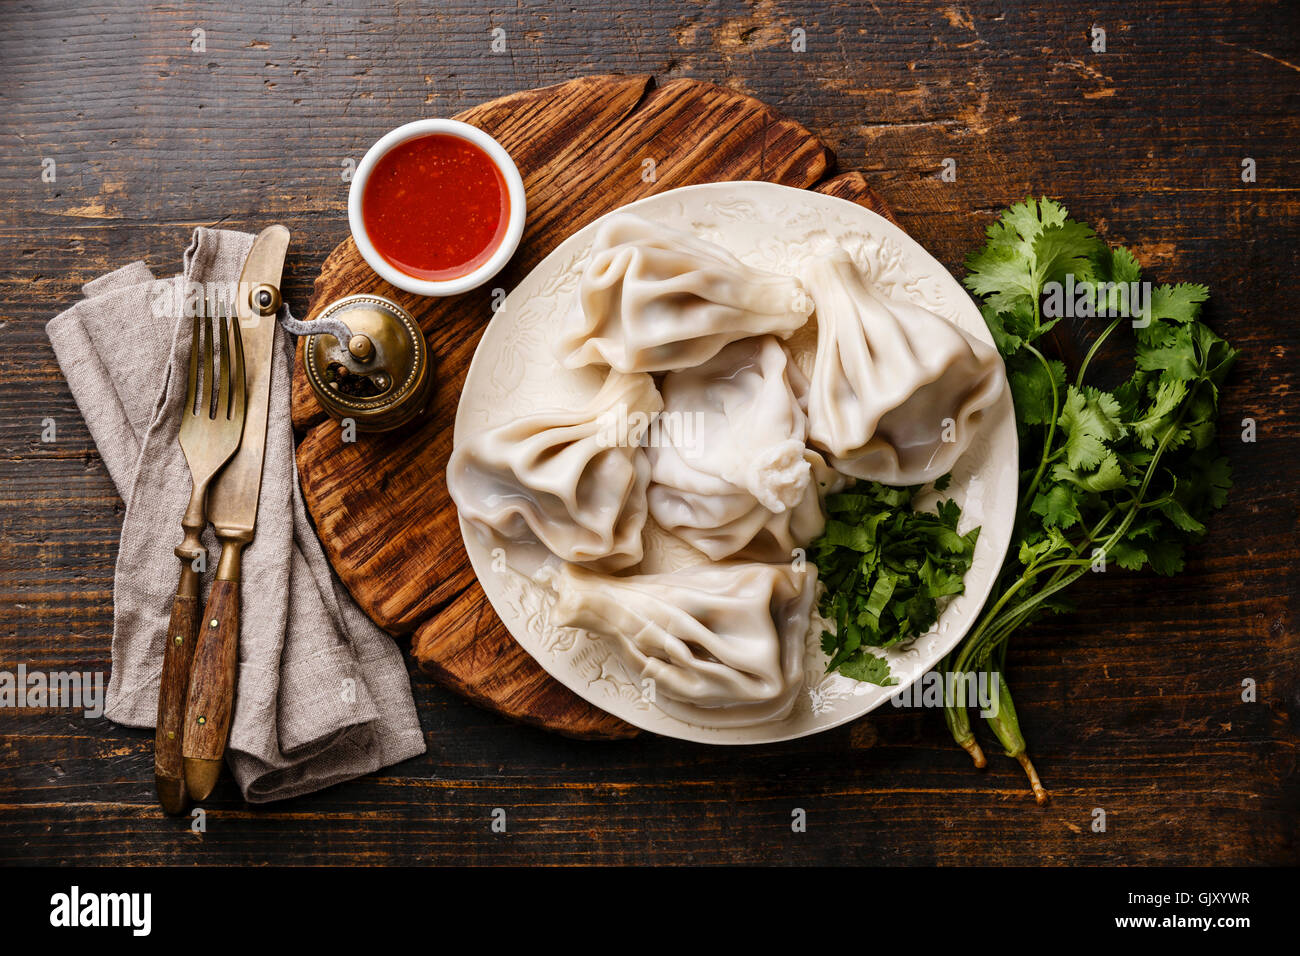 Georgian dumplings Khinkali with meat and tomato spicy sauce satsebeli on wooden background Stock Photo